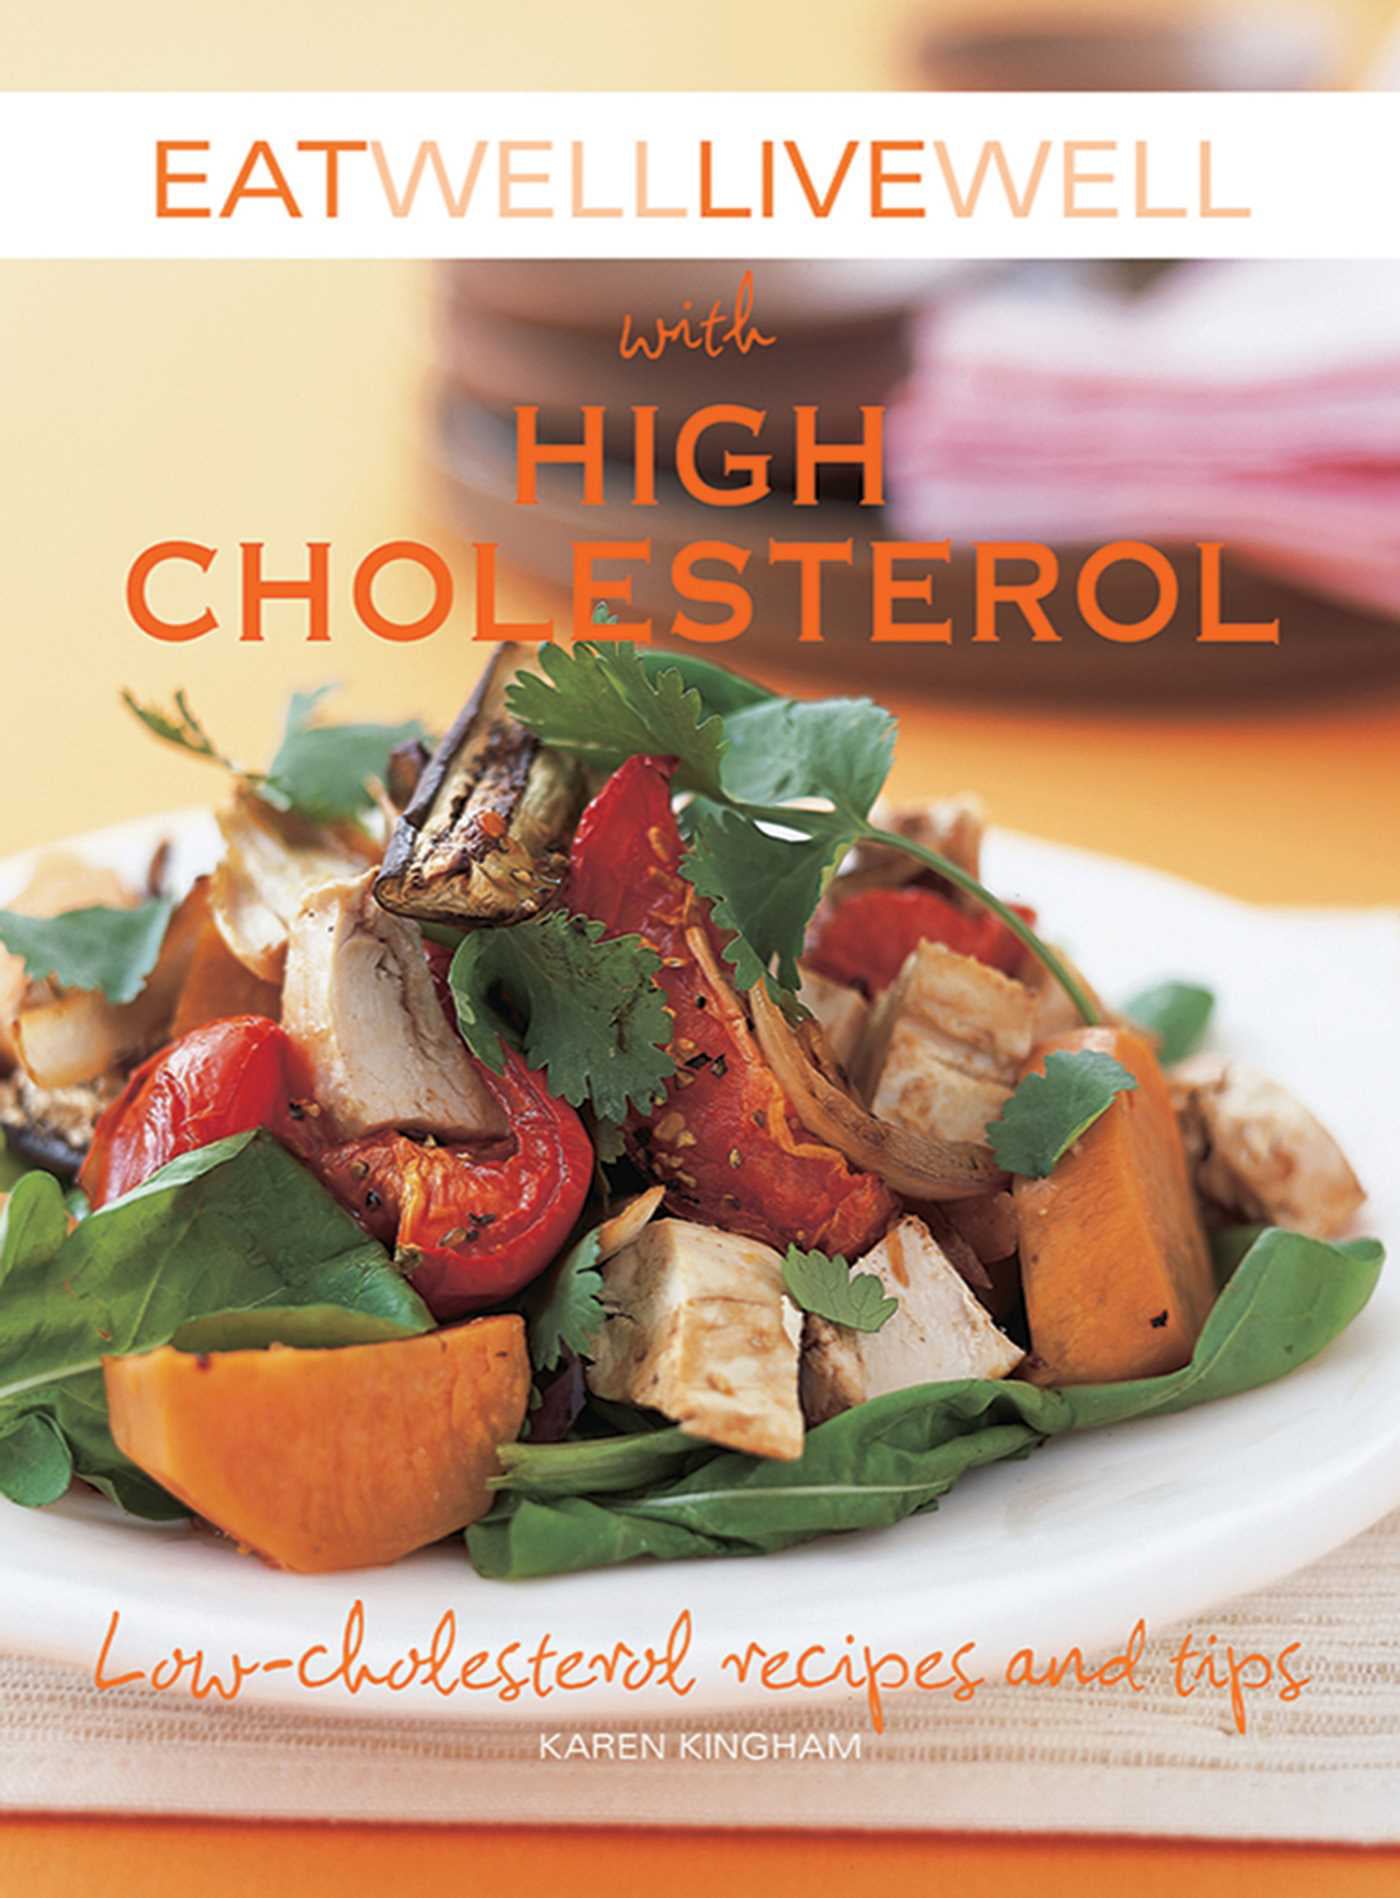 Eat Well Live Well With High Cholesterol Low Cholesterol Recipes And Tips Paperback Walmart Com Walmart Com